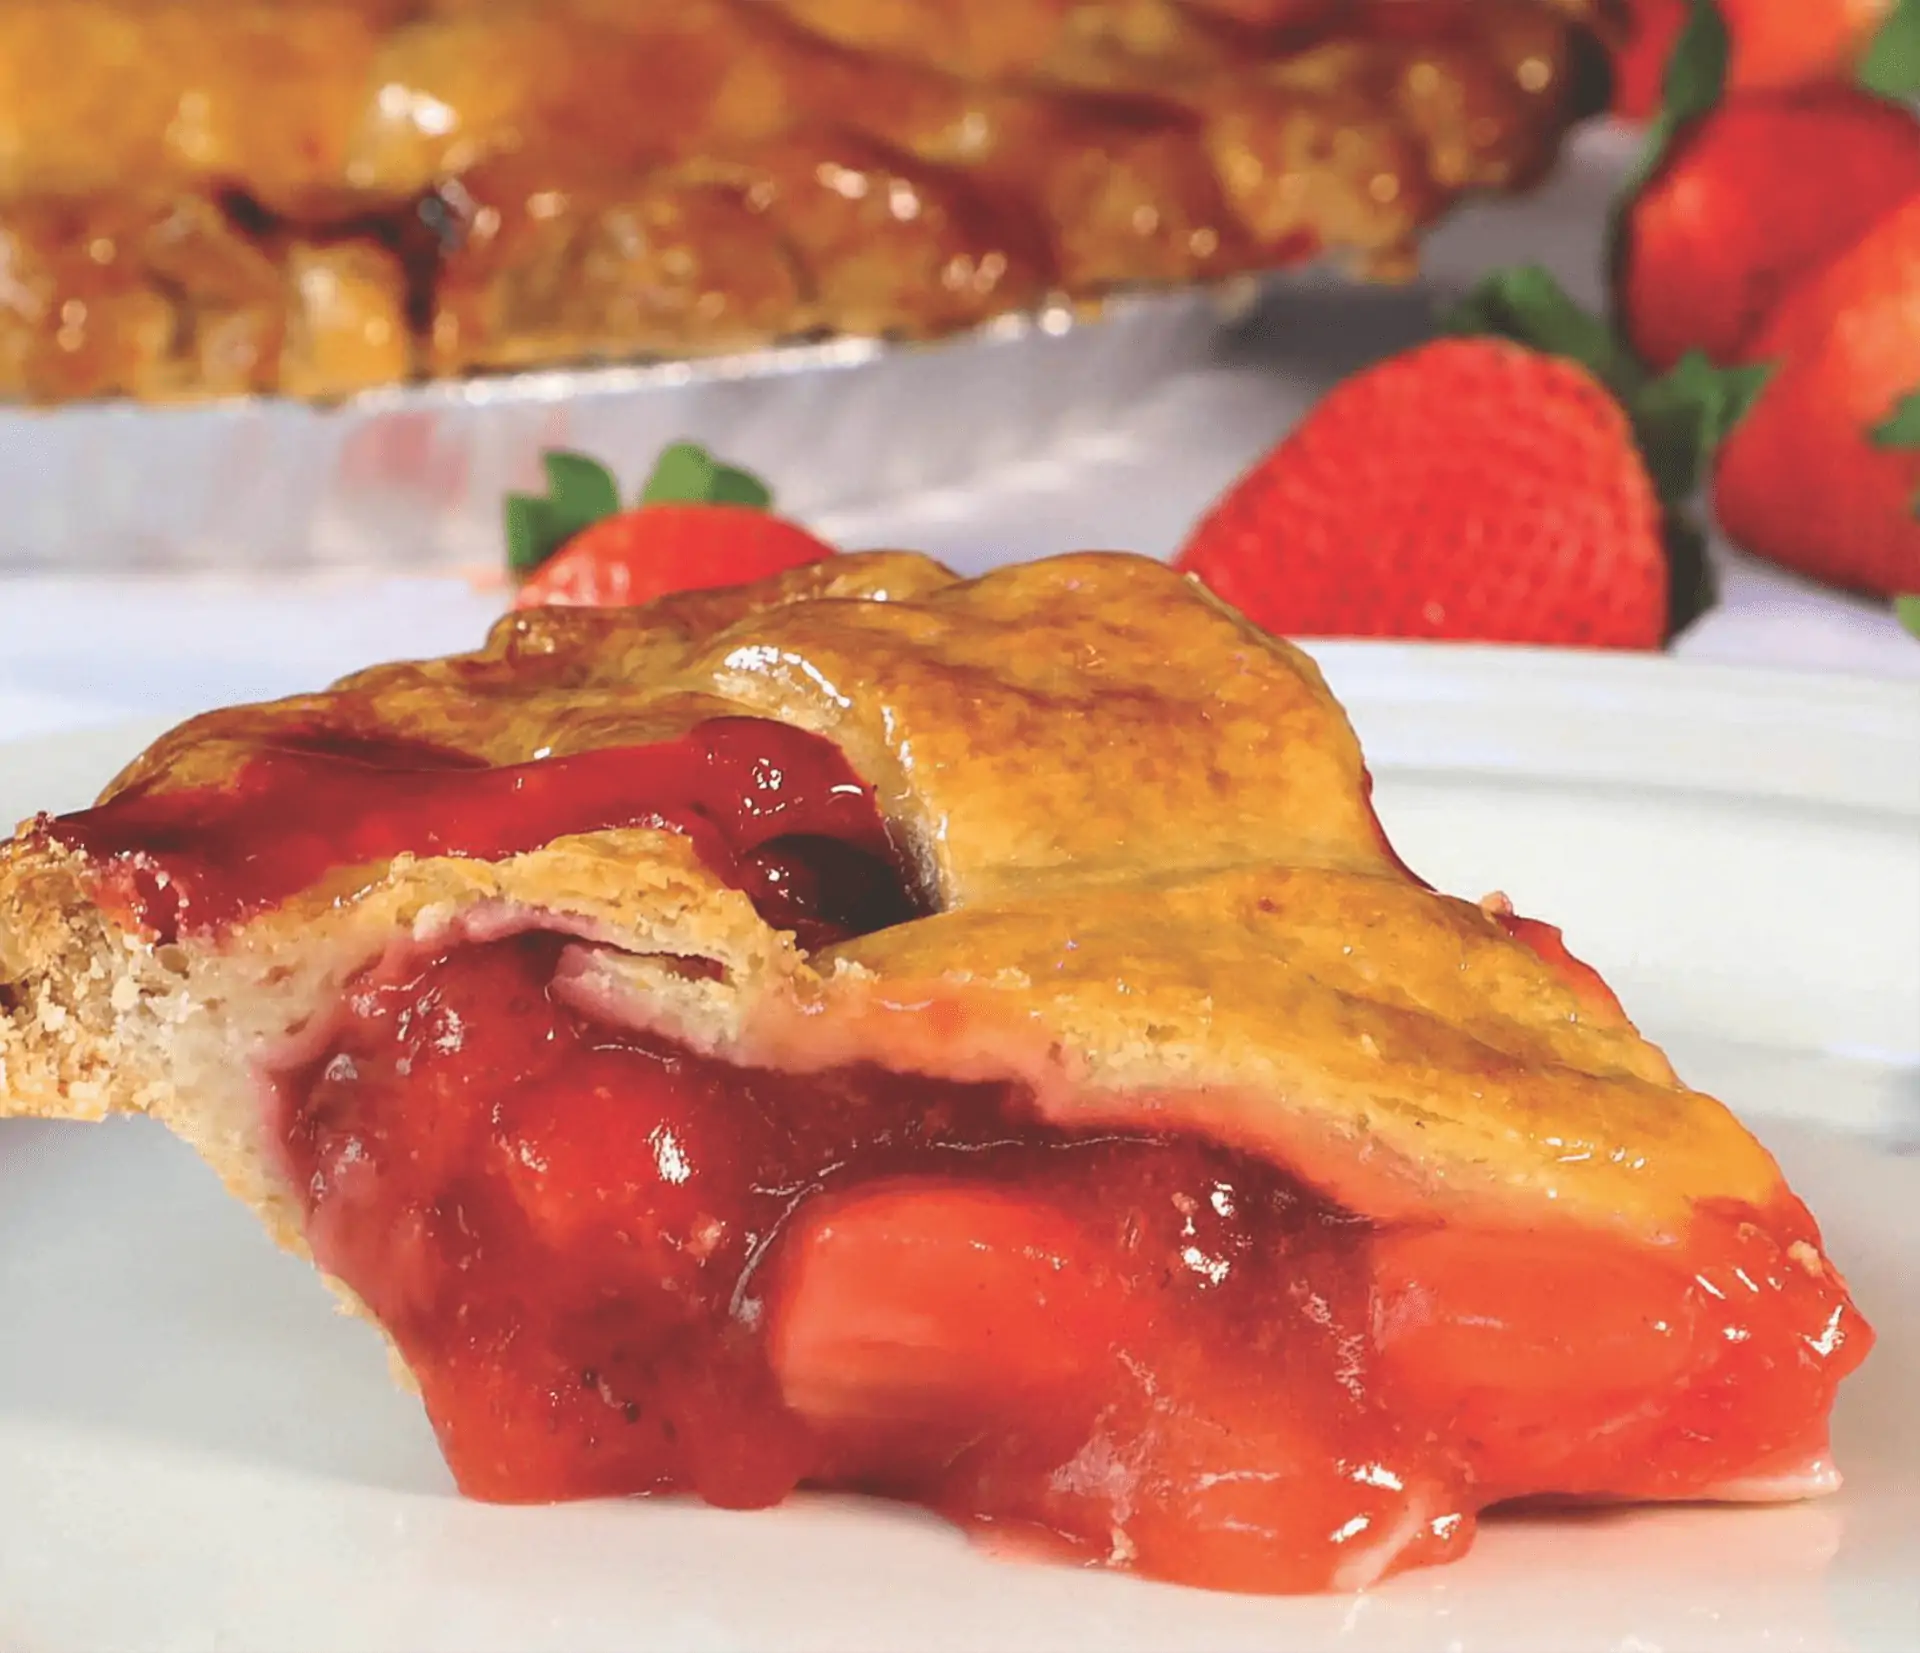 Slice of cherry pie with various whole fruits visible in the background. 